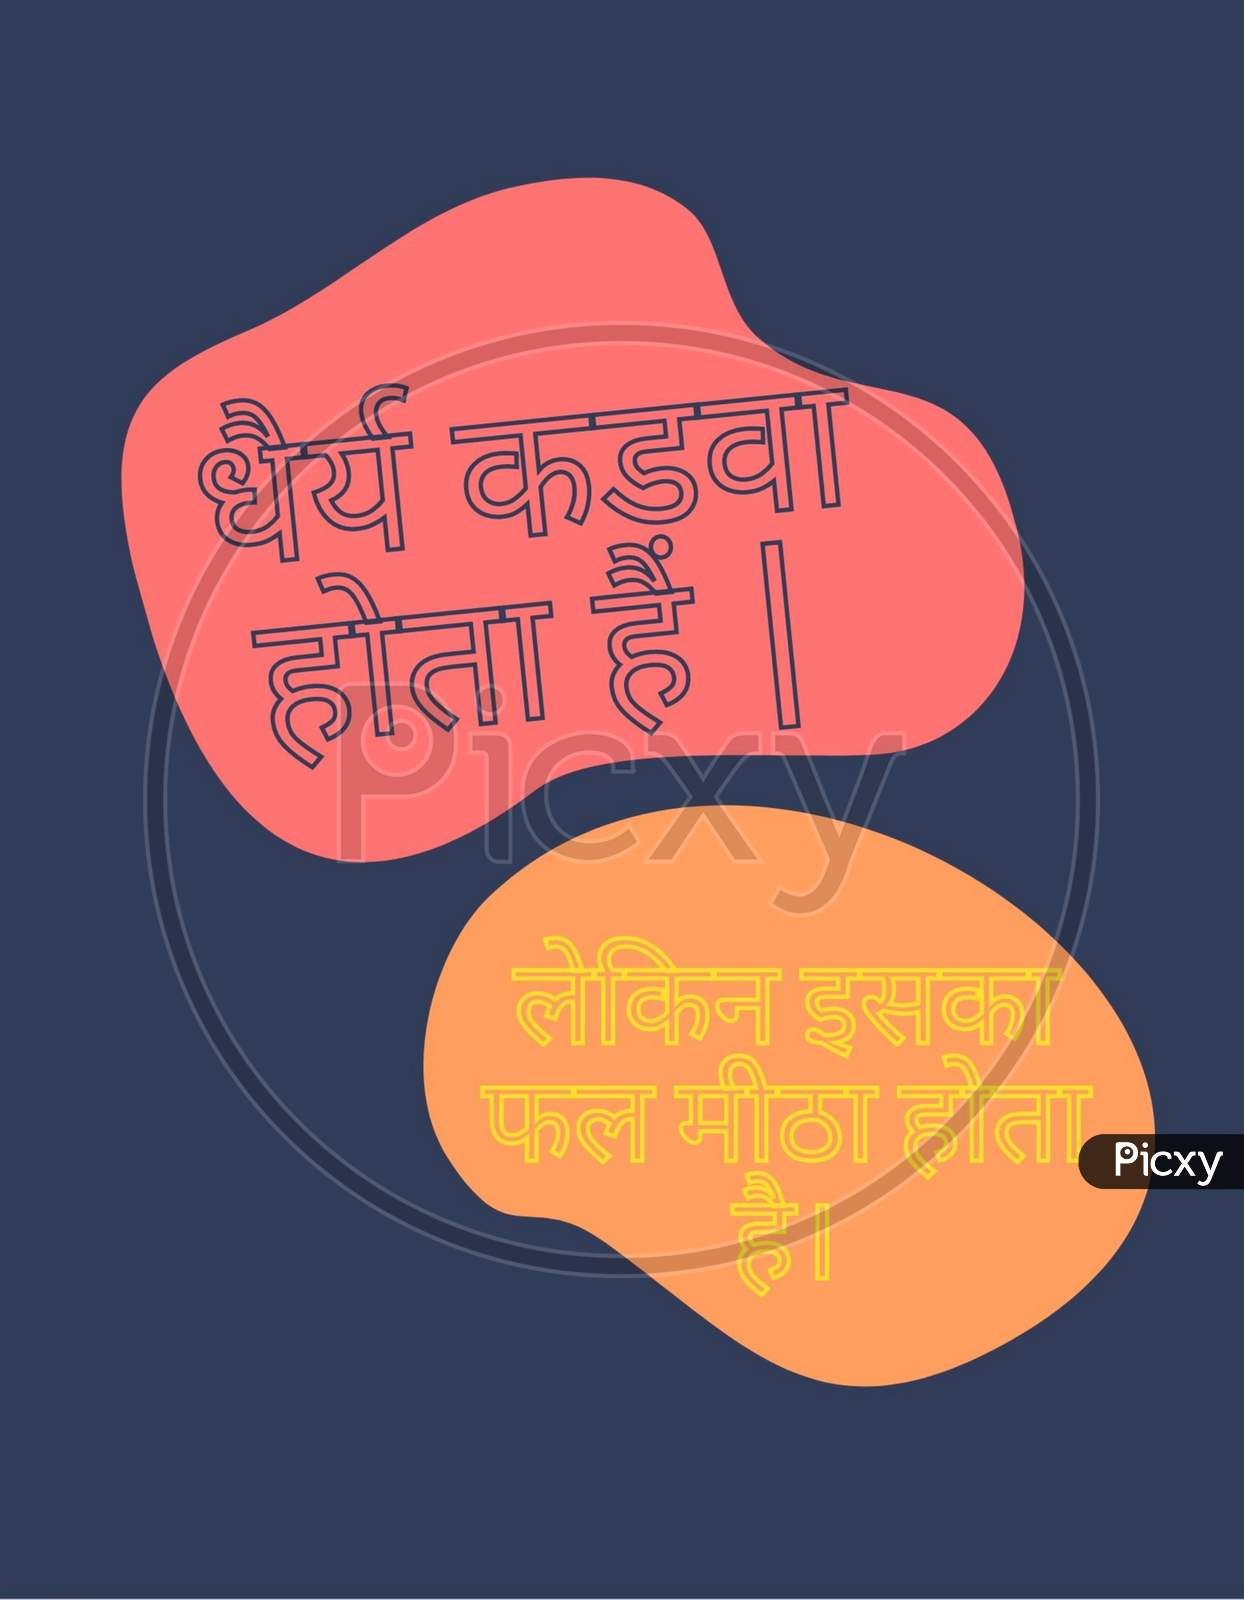 Life Hindi Quote patience is bitter but its fruit is sweet illustration art text